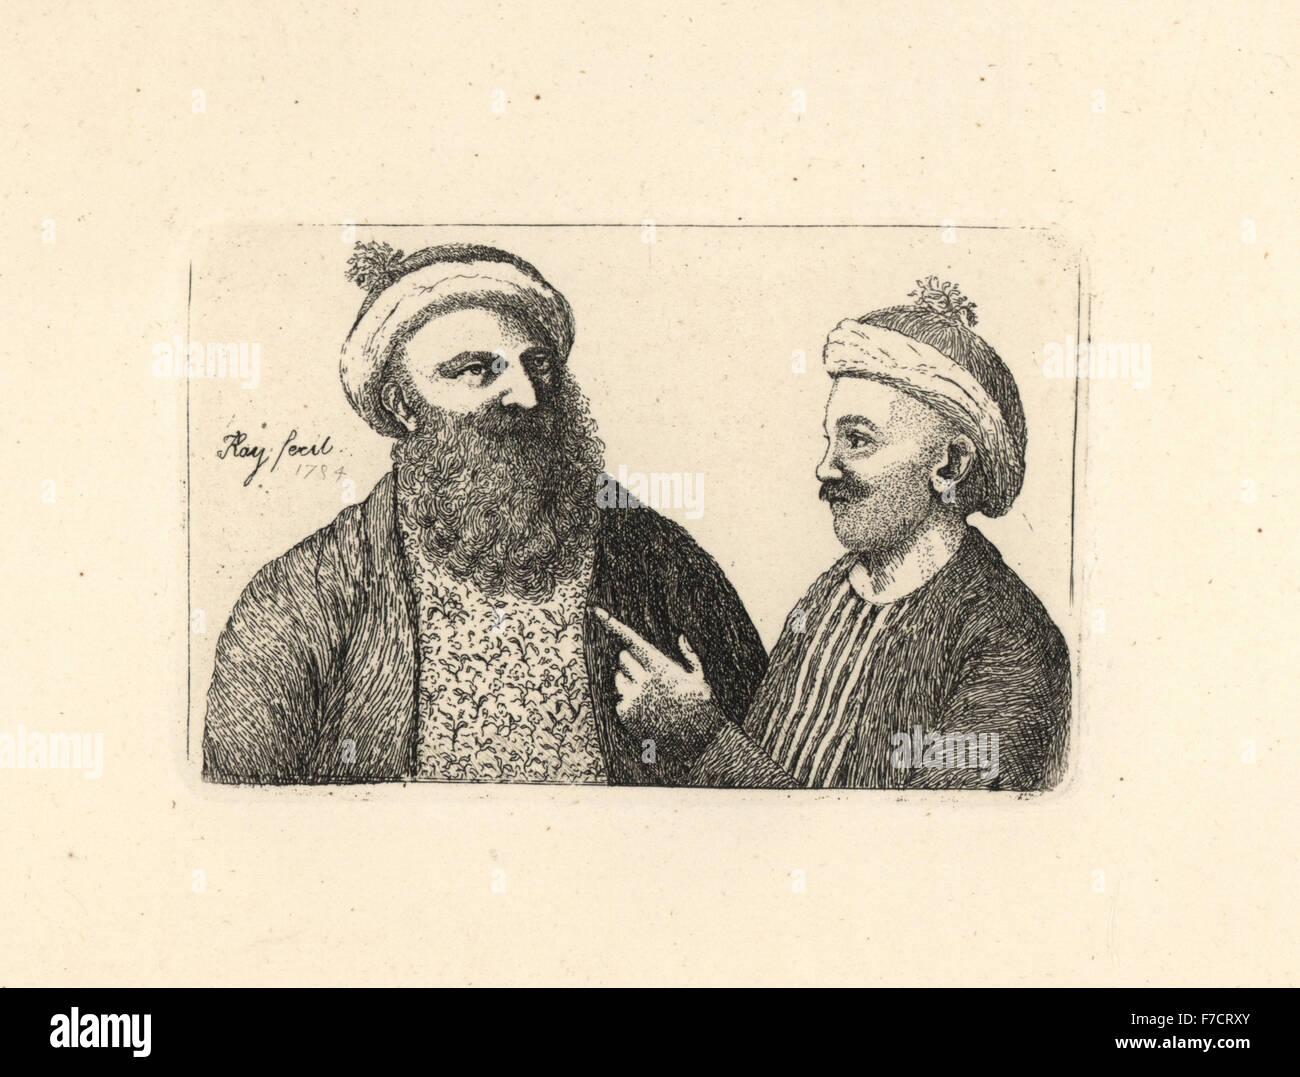 Two Turkish slipper or shoe makers, Mahomet and his son Abraham. Copperplate engraving by John Kay from A Series of Original Portraits and Caricature Etchings, Hugh Paton, Edinburgh, 1842. Stock Photo